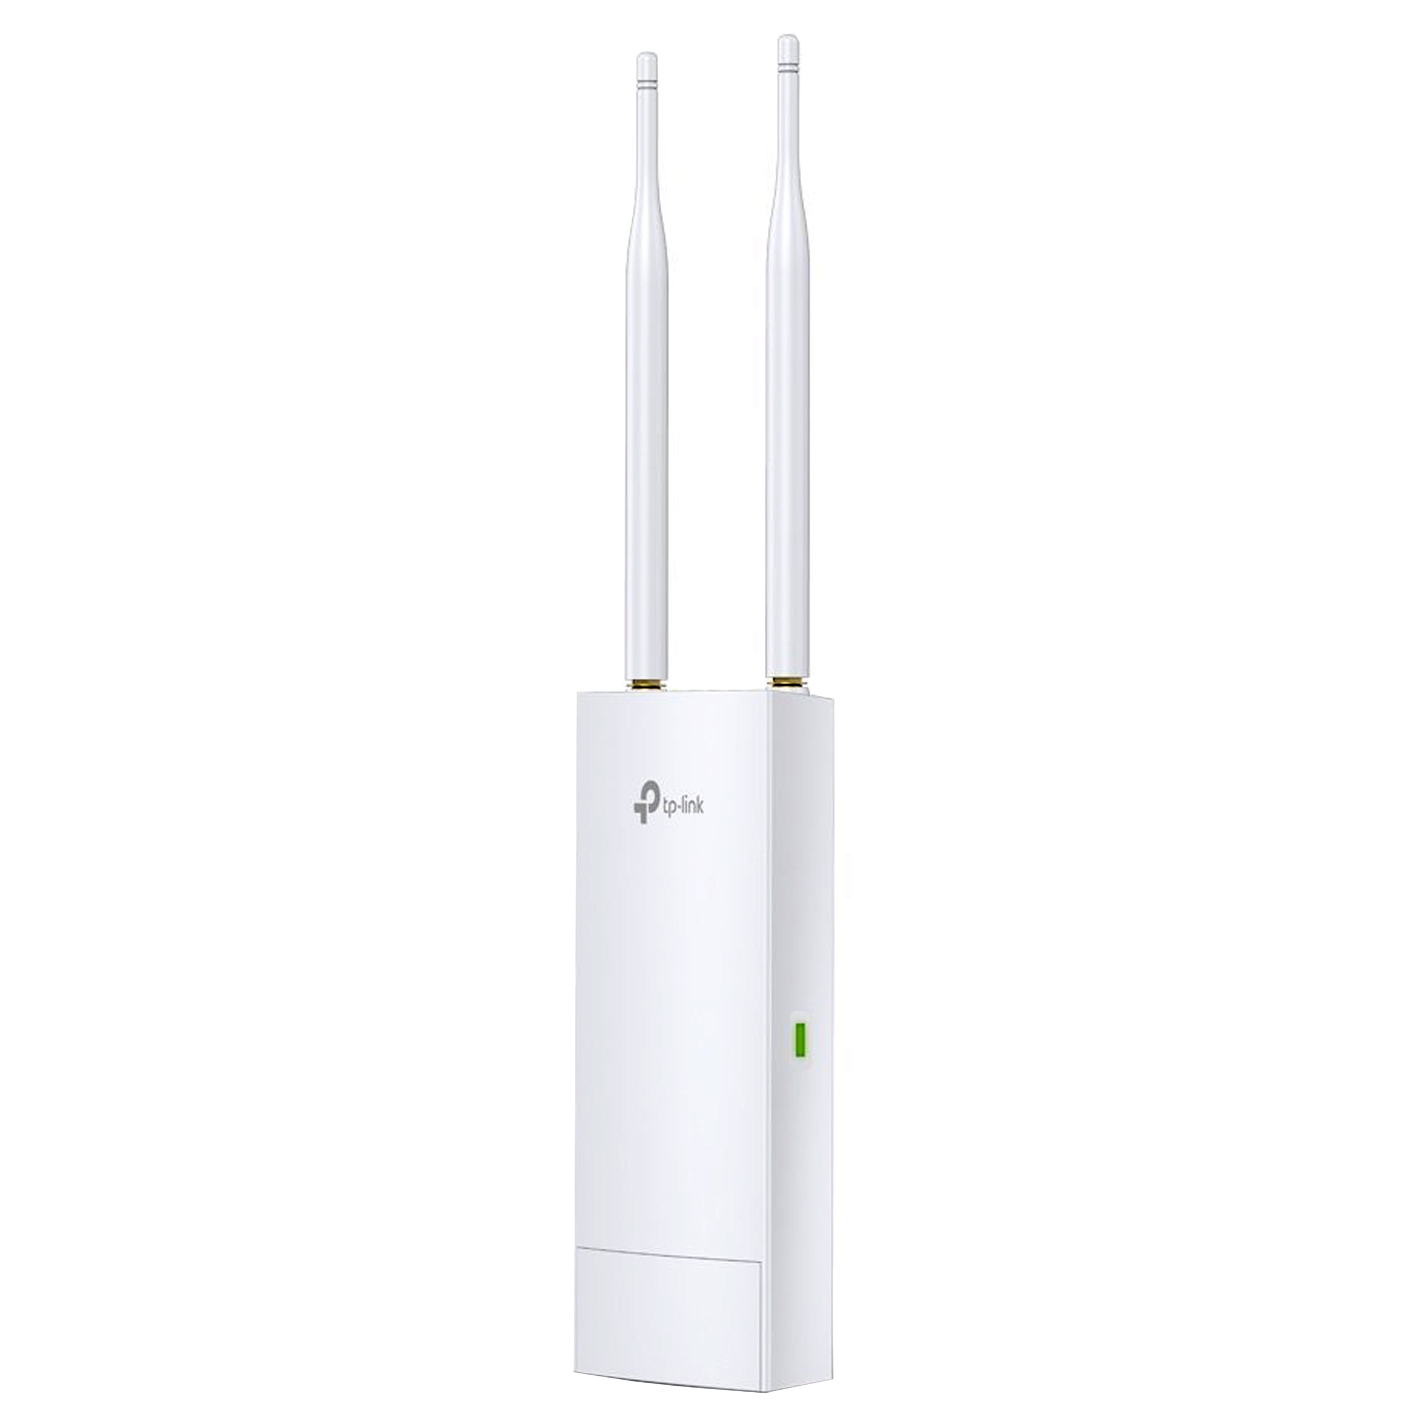 300Mbps Wireless N Outdoor Access PointQualcomm 300Mbps at 2.4GHz 802.11b/g/n 1 10/100Mbps LAN Passive PoE Supported Multi-SSID 5dBi external omni antennas Pol